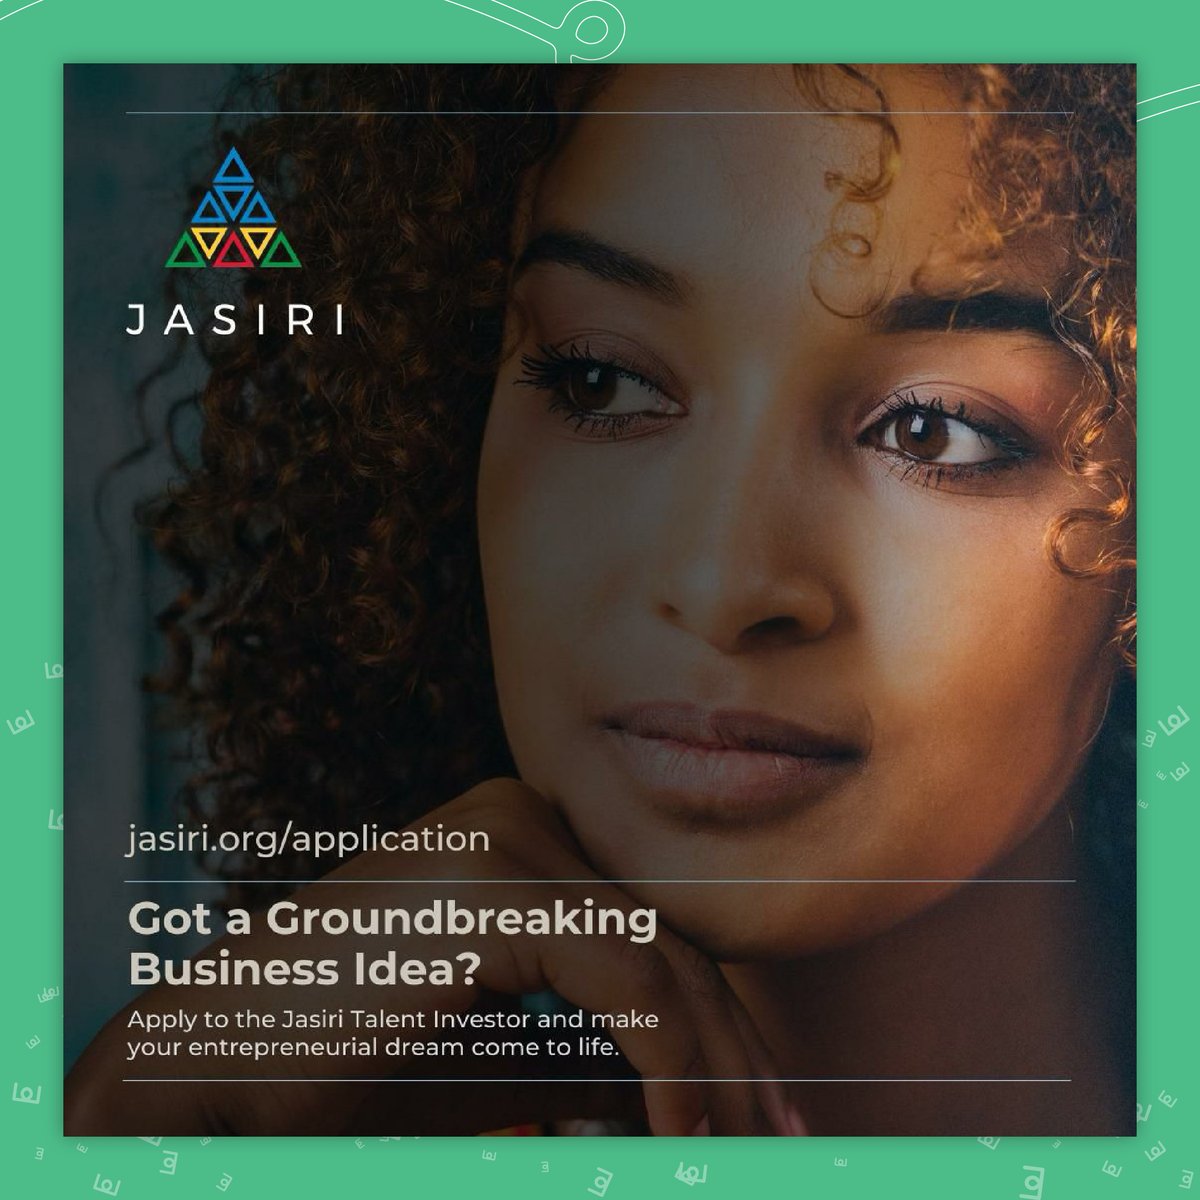 Ethiopian women with visionary ideas, it's your time to shine! Jasiri is on the lookout for female entrepreneurs with groundbreaking business concepts. Apply now at jasiri.org/application and join a community where your ideas have the power to create change.